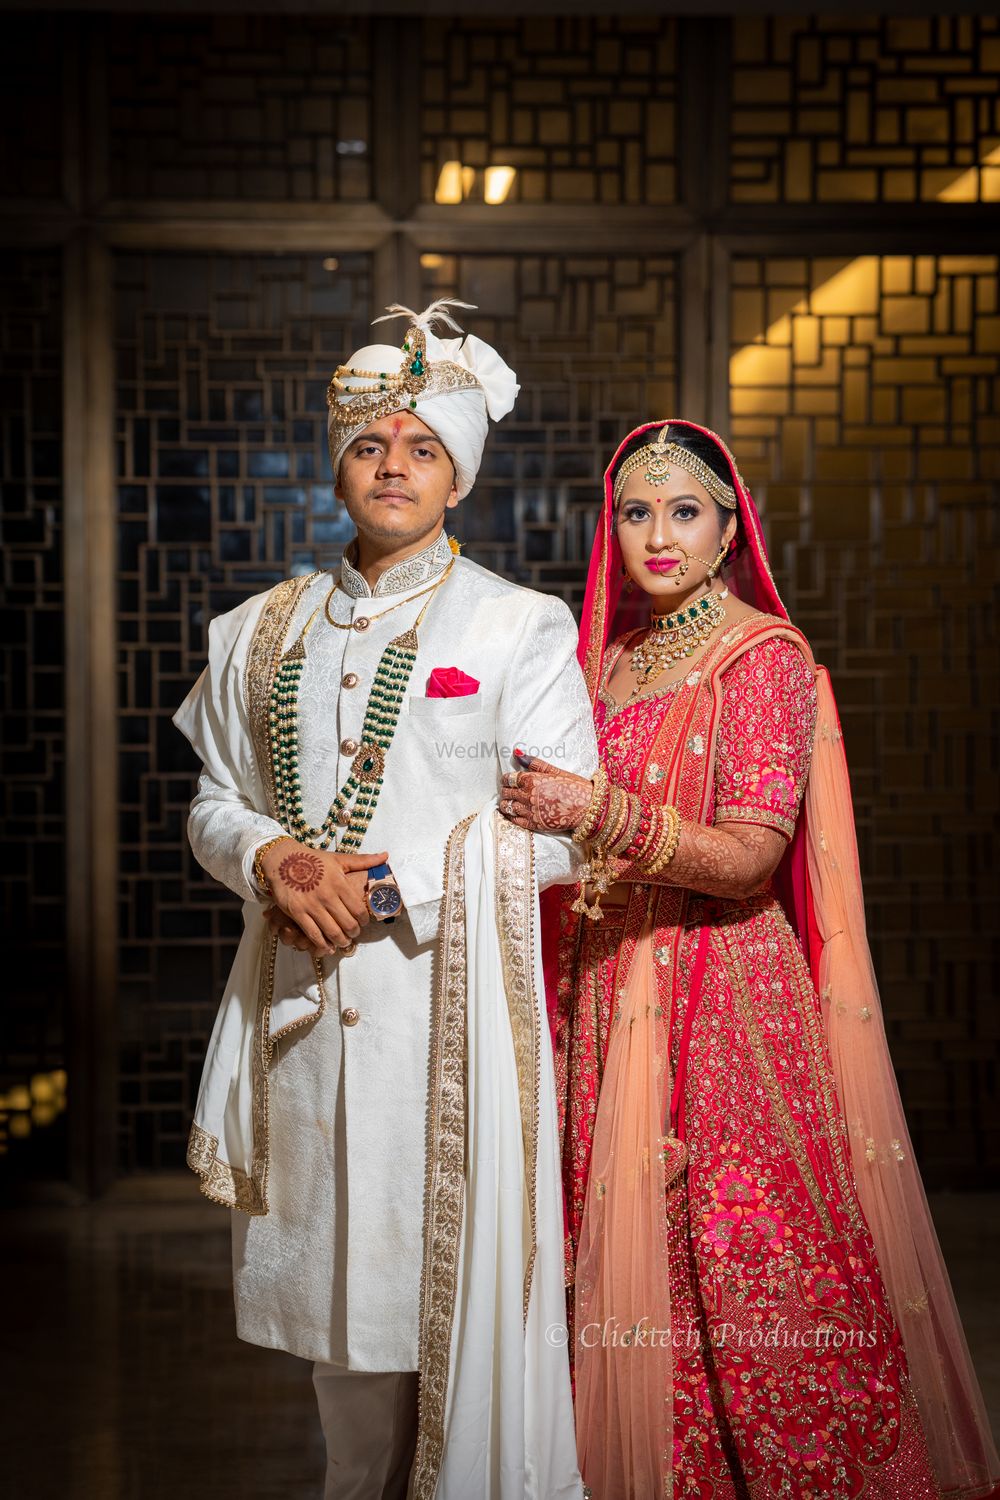 Photo From Arushi + Akash - By Clicktech Production